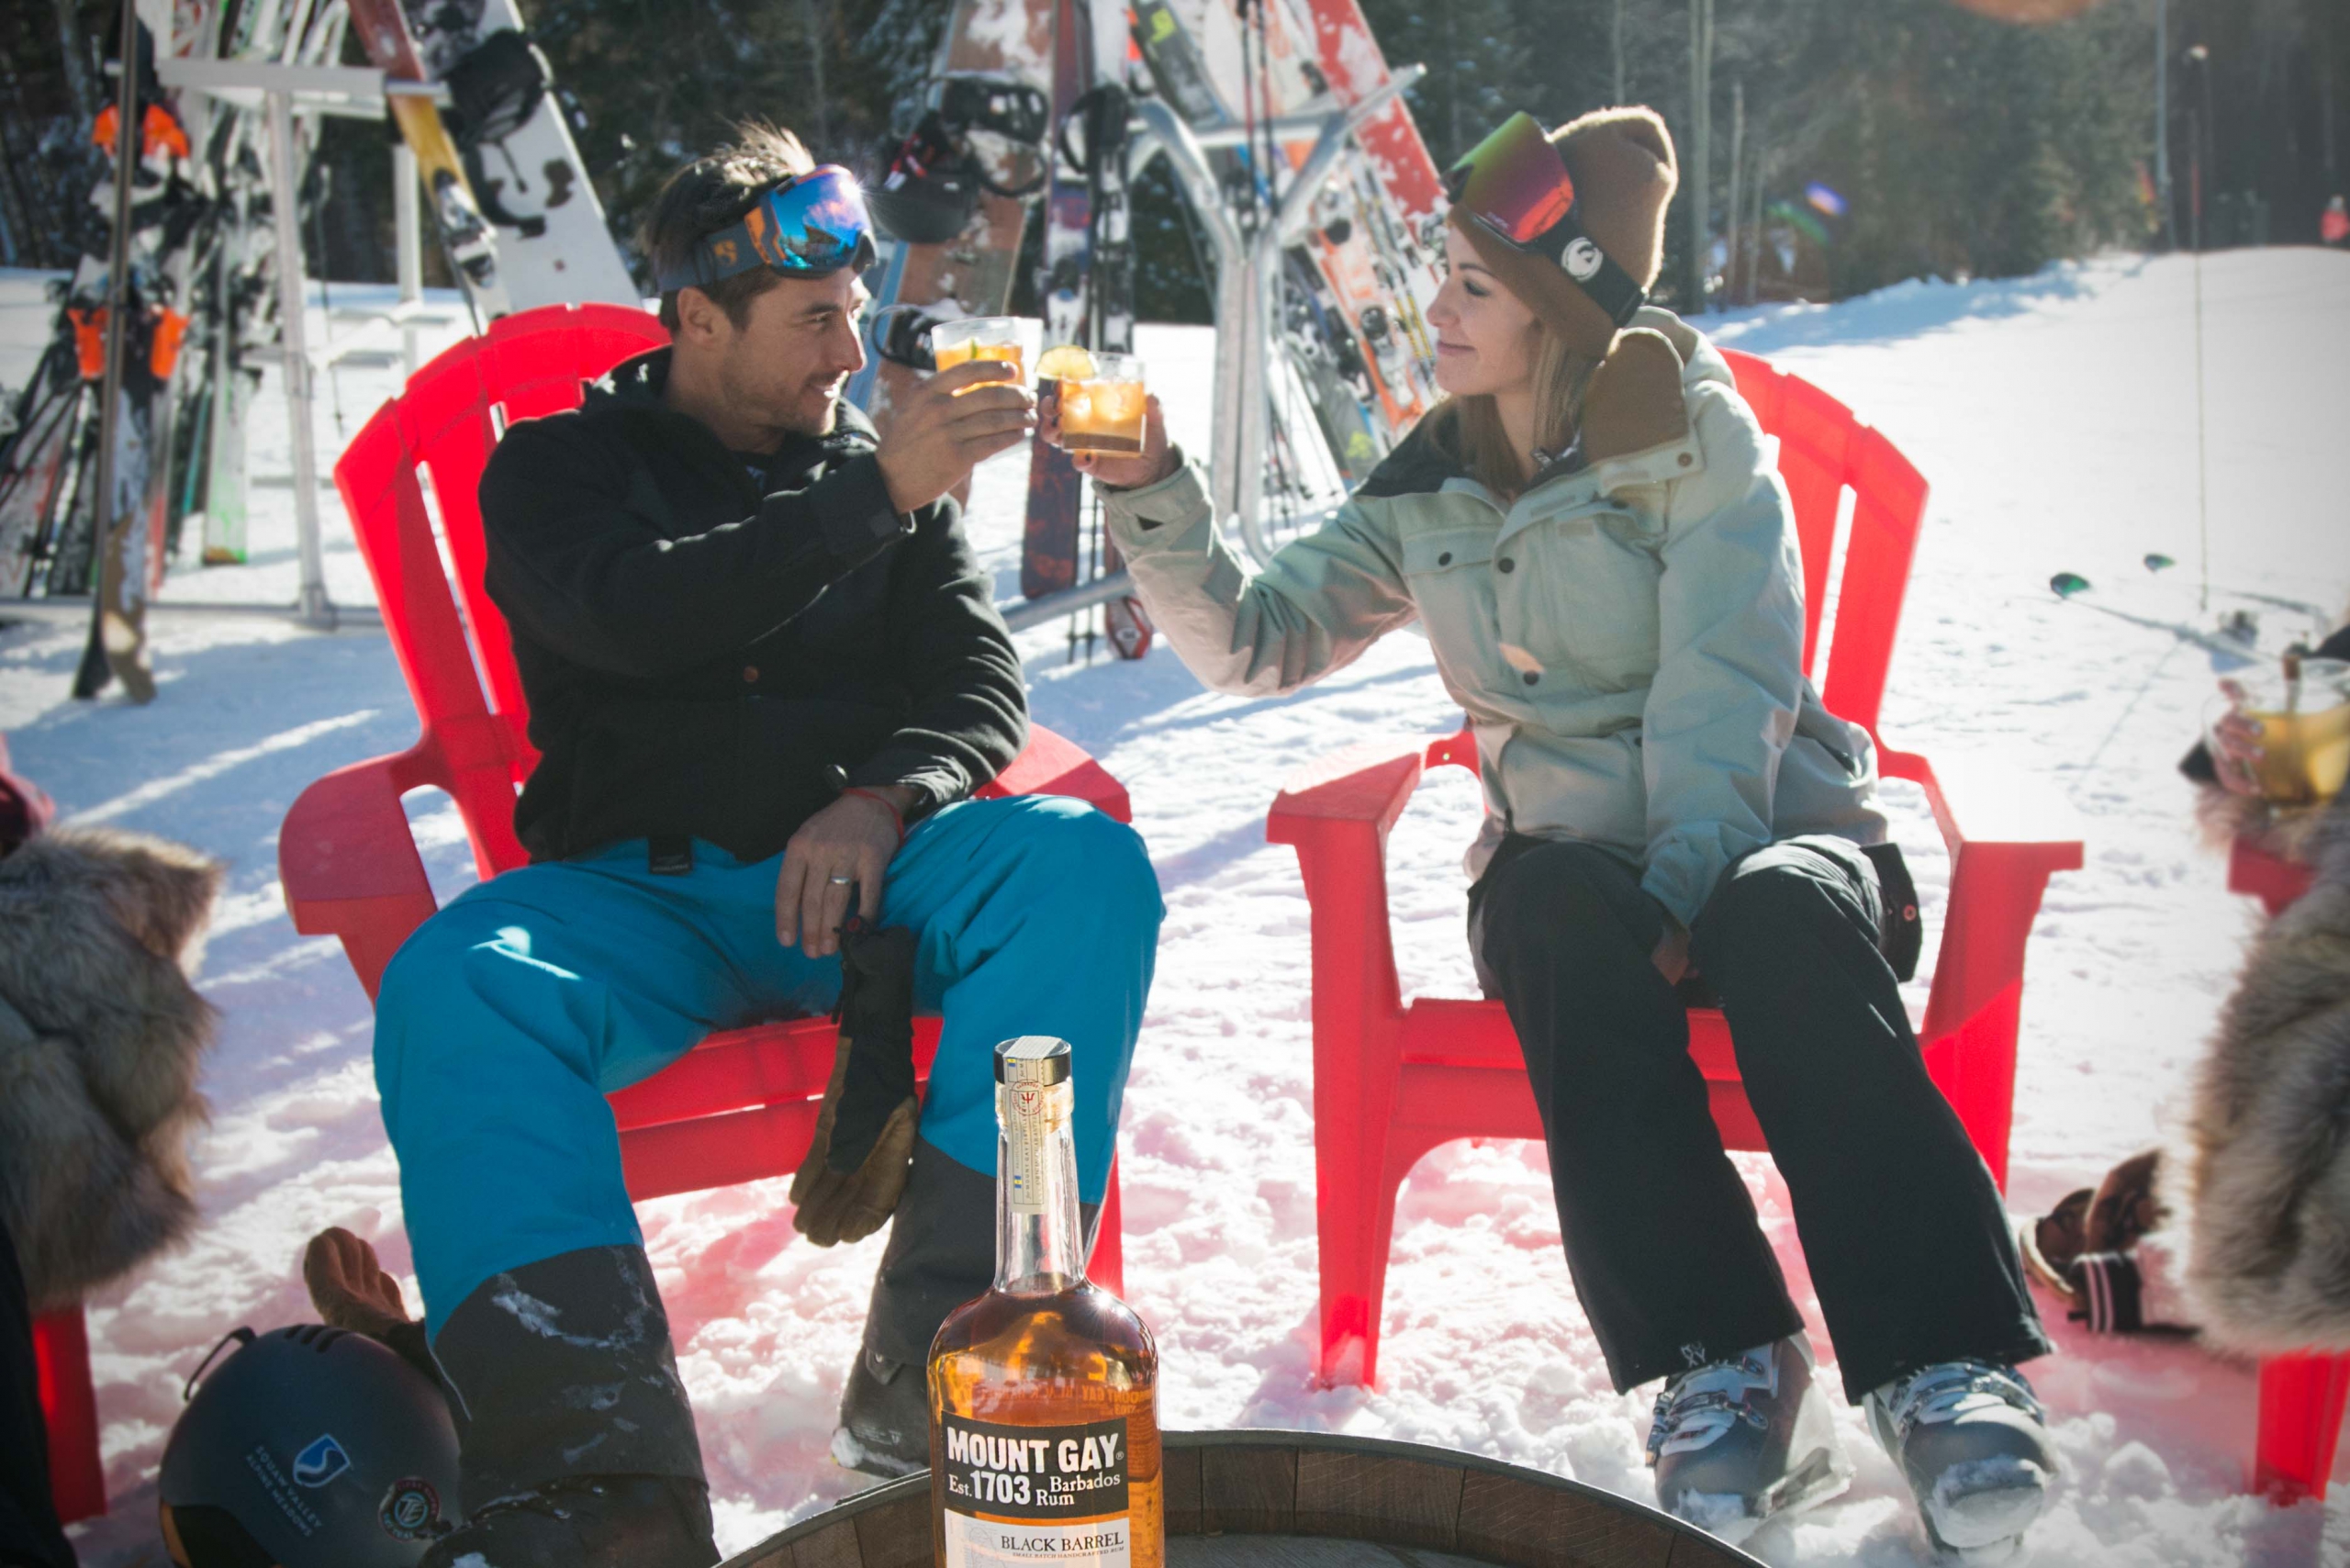 A man a women sit in red chairs at the base of a ski slope as they cheers their cocktails